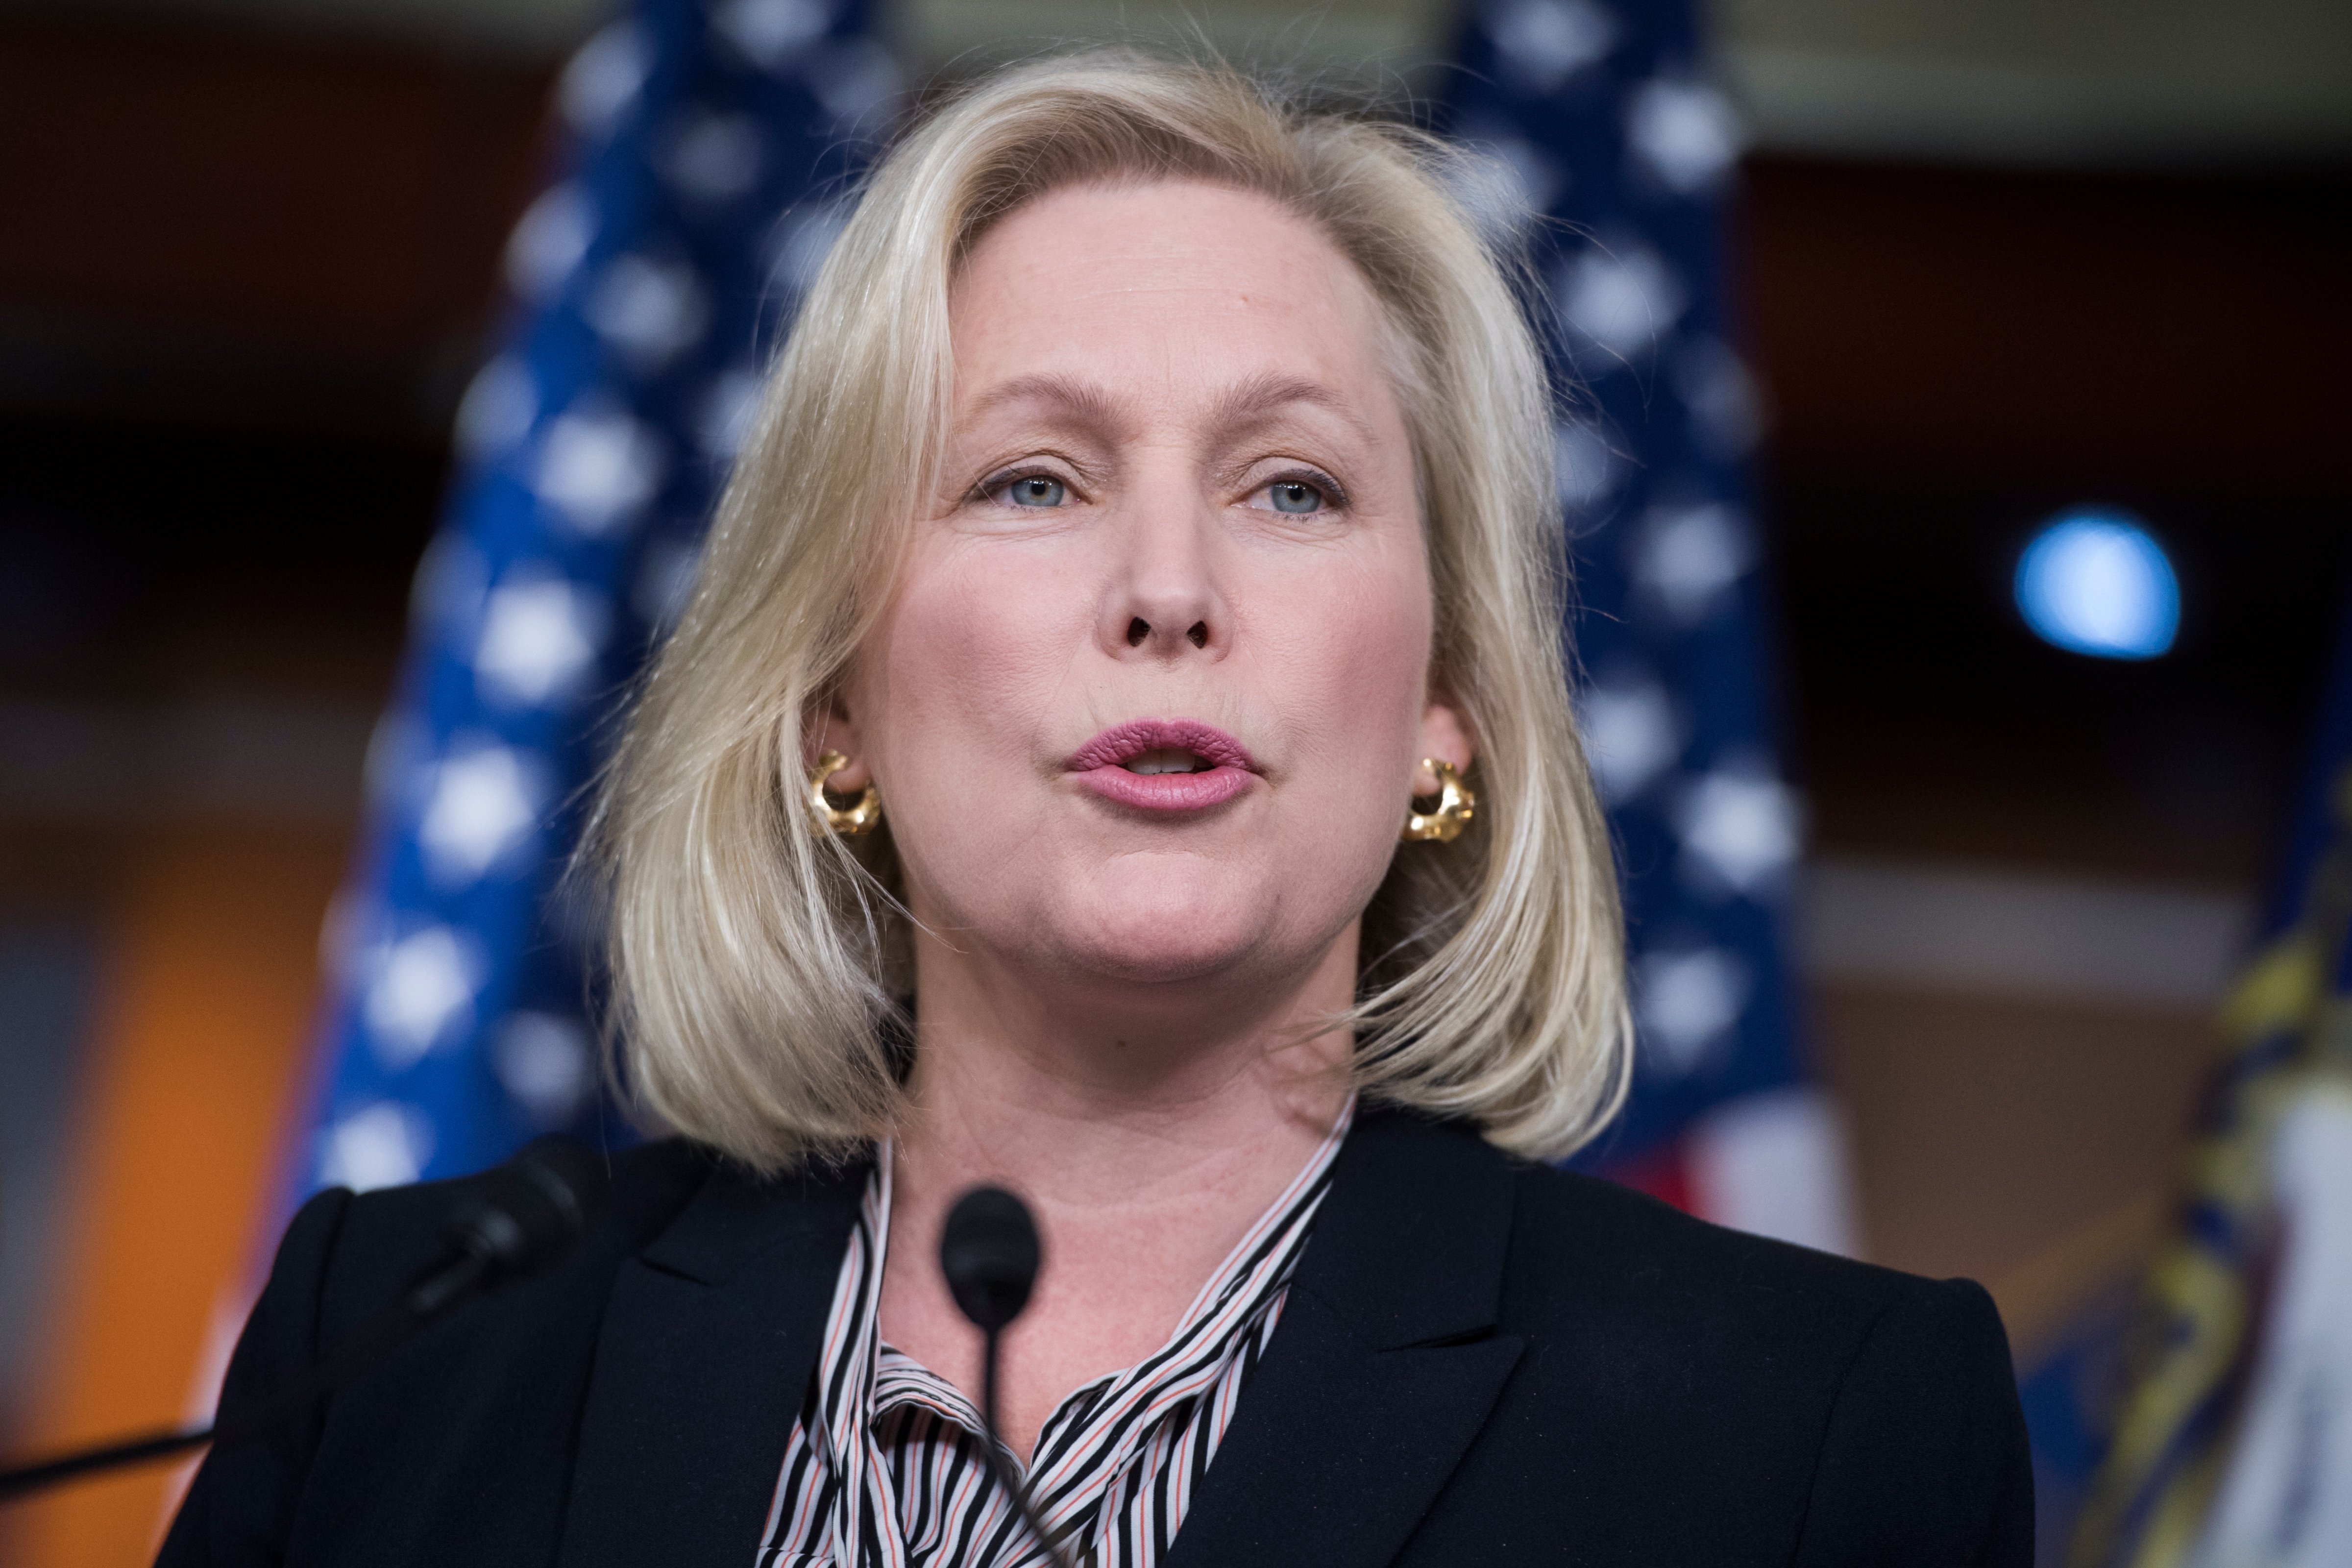 Sen. Kirsten Gillibrand, D-N.Y.,  holds a news conference in the Capitol Visitor Center to introduce legislation that aims to address and prevent sexual harassment for Capitol Hill staff on November 15, 2017. (Tom Williams—CQ-Roll Call,Inc.)